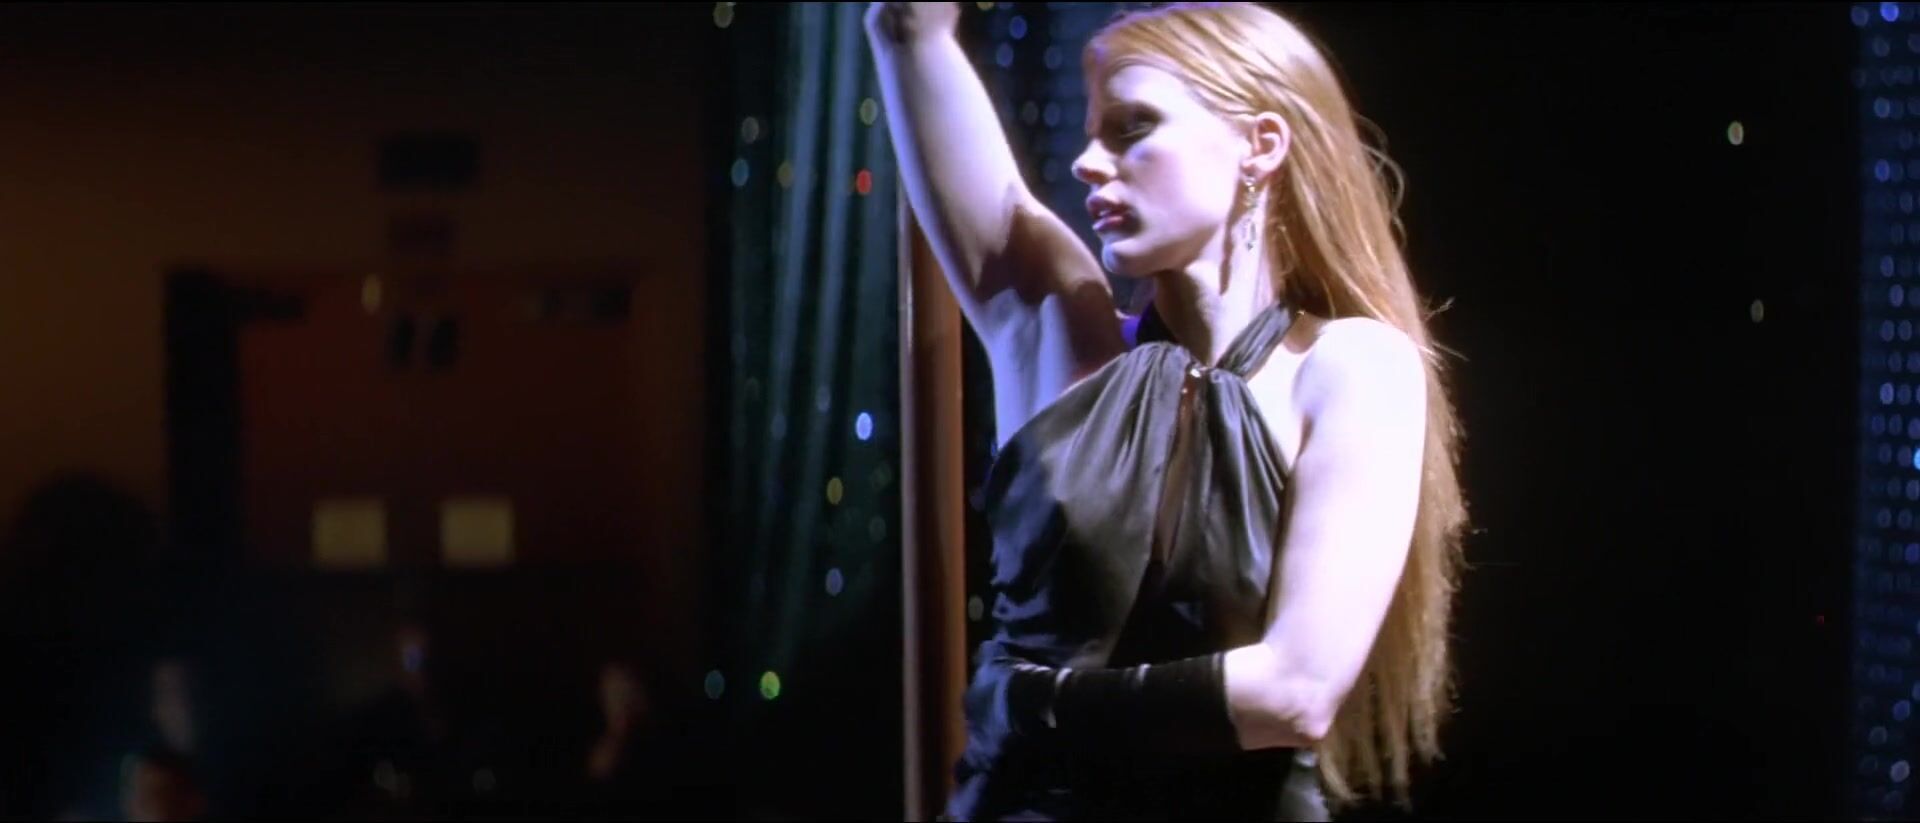 Big Ass Jessica Chastain moves around pole and pulls dress down showing boobies in Jolene (2008) Dirty Roulette